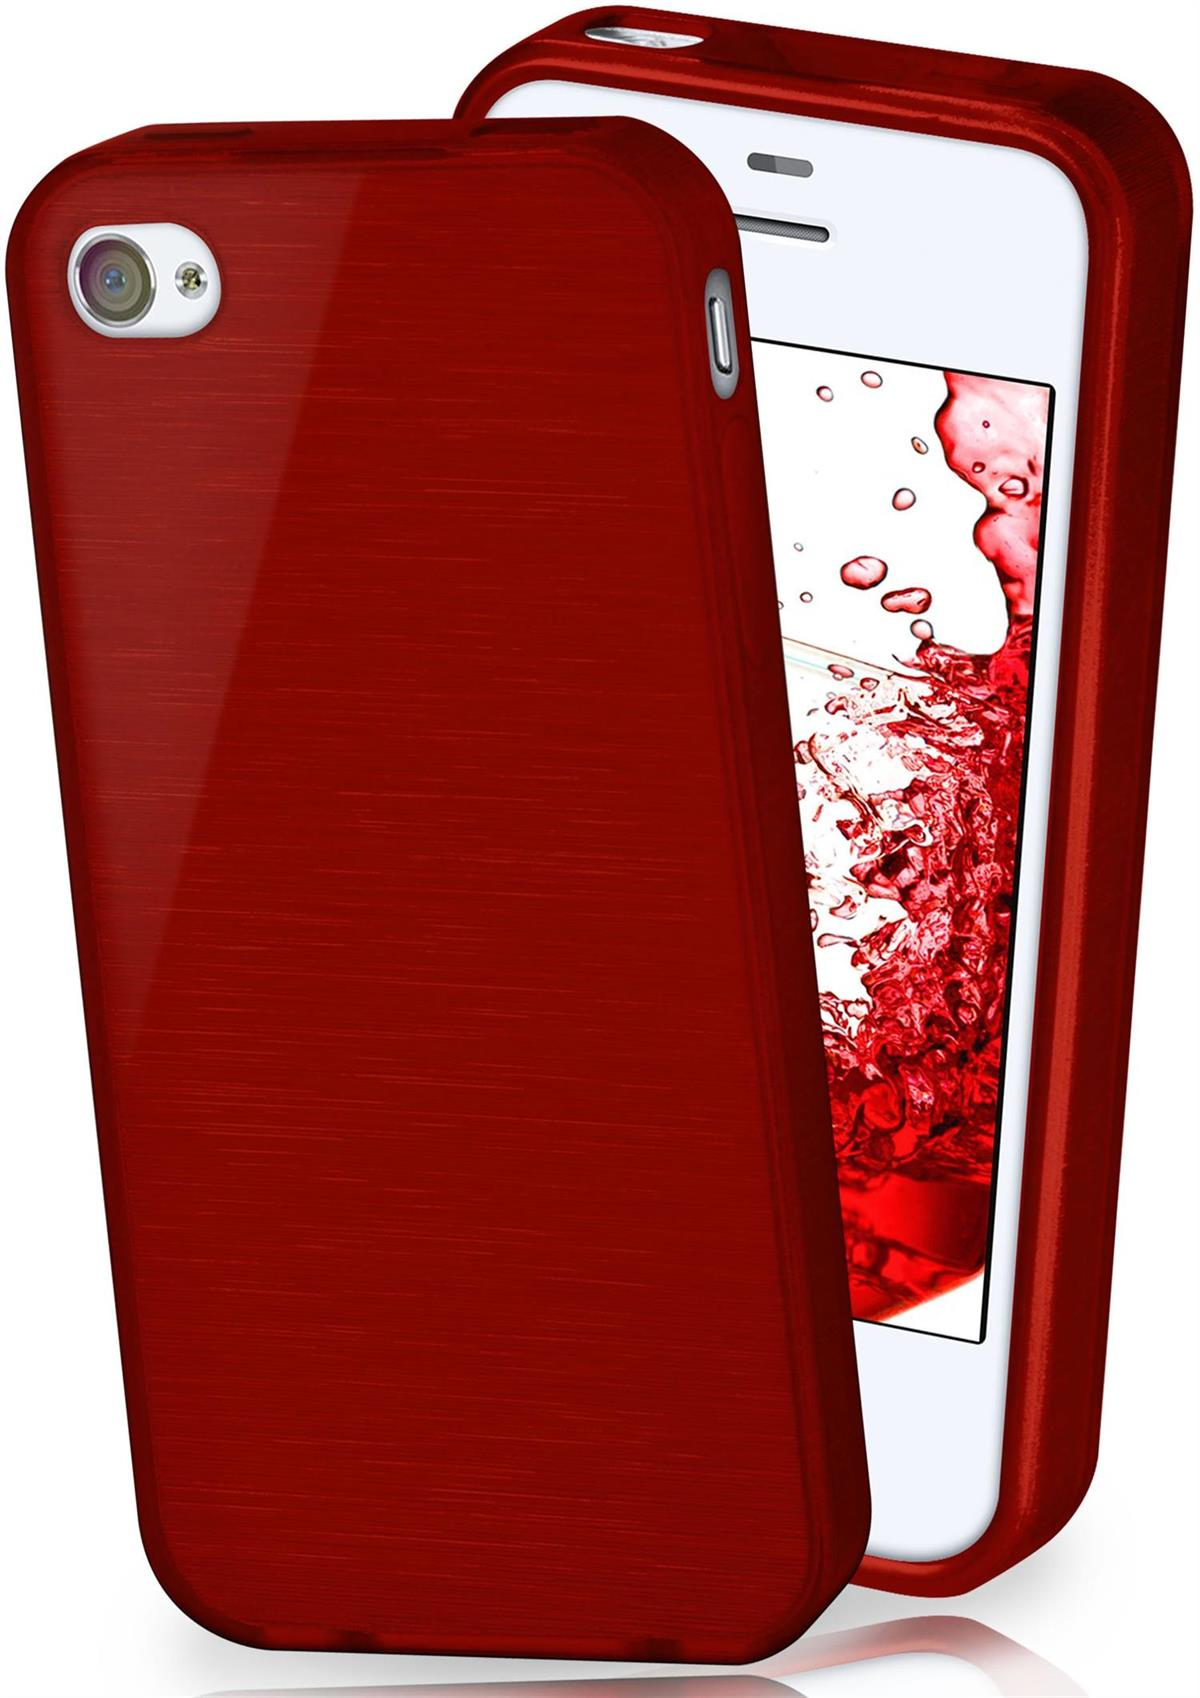 Case, MOEX iPhone Brushed 4S, Apple, Crimson-Red Backcover,